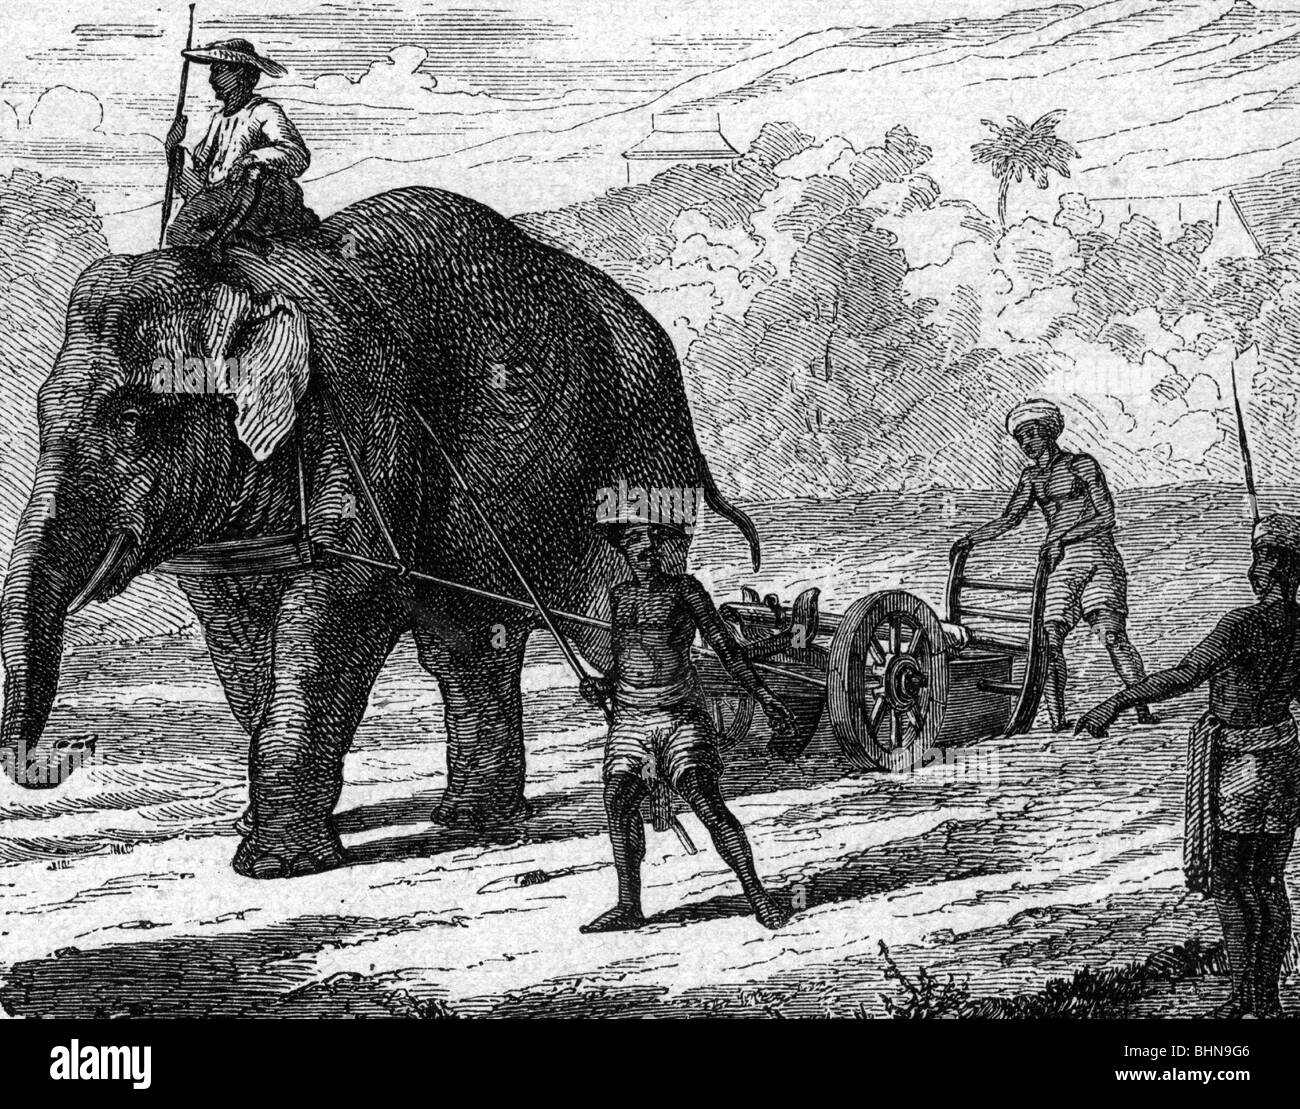 agriculture, farming, men with elephant plow, wood engraving, 19th century, historic, historical, working animal, working animals, plough, plow , ploughs, plows, yoke oxen to the plough, cultivation, farmer, exotic, people, Stock Photo